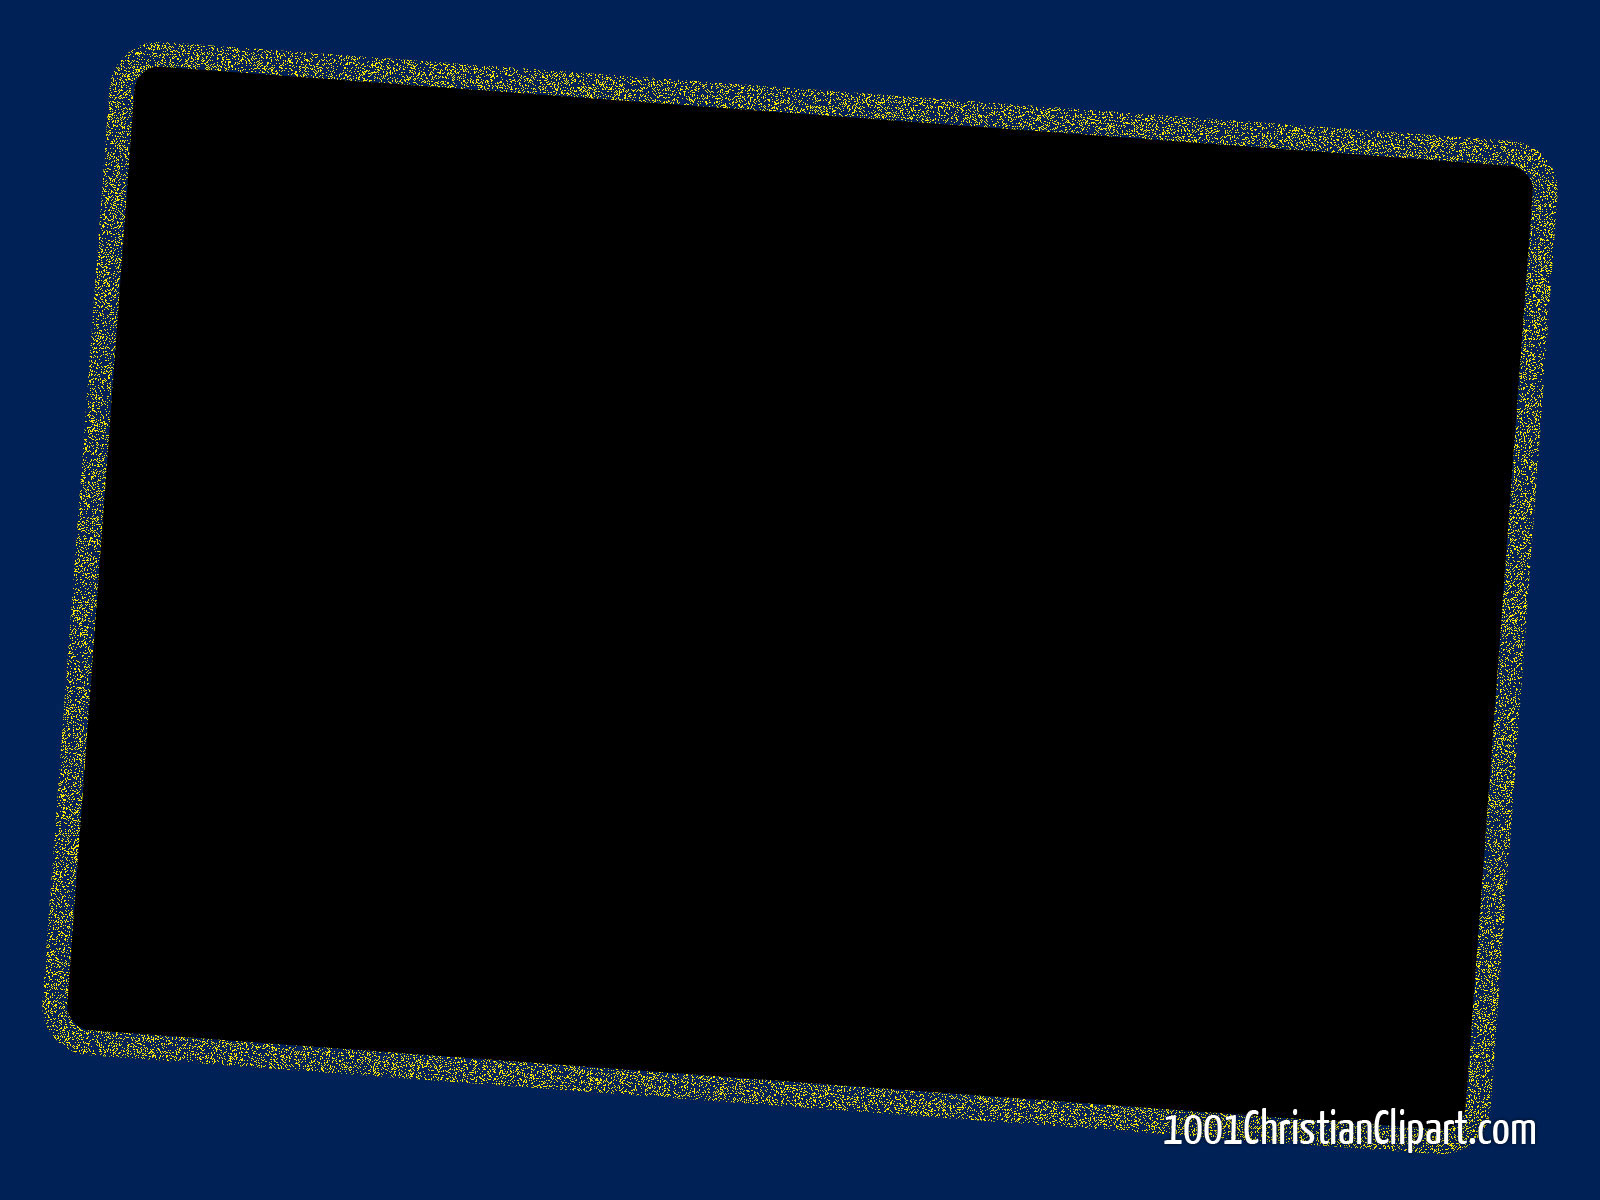 Clip Art Borders Blue theme, free download Powerpoint backgrounds and 